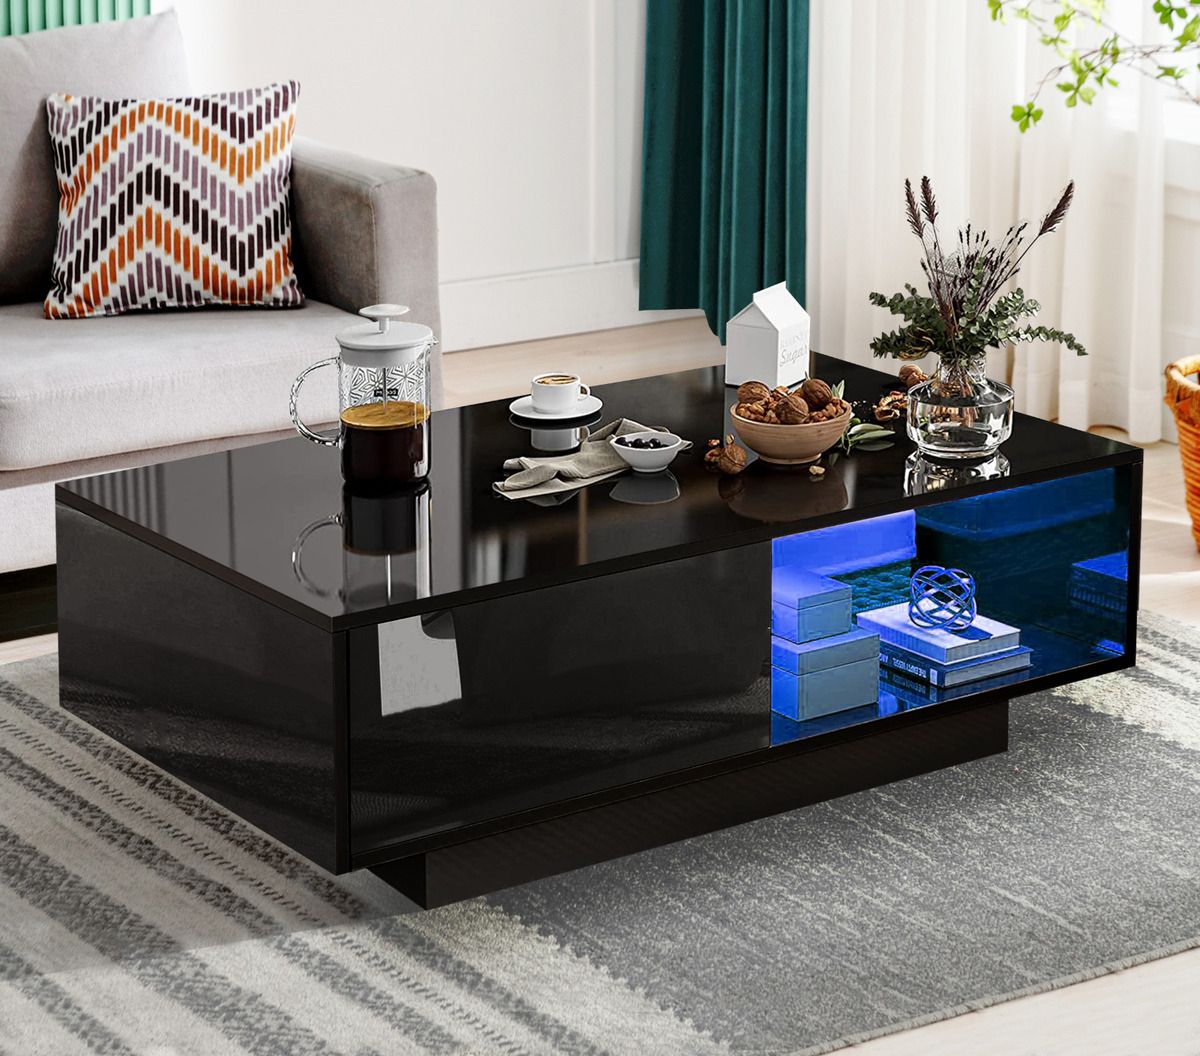 Black Led Wooden Coffee Table With Storage Drawers High Gloss Modern Living  Room | Ebay Regarding High Gloss Black Coffee Tables (View 12 of 15)